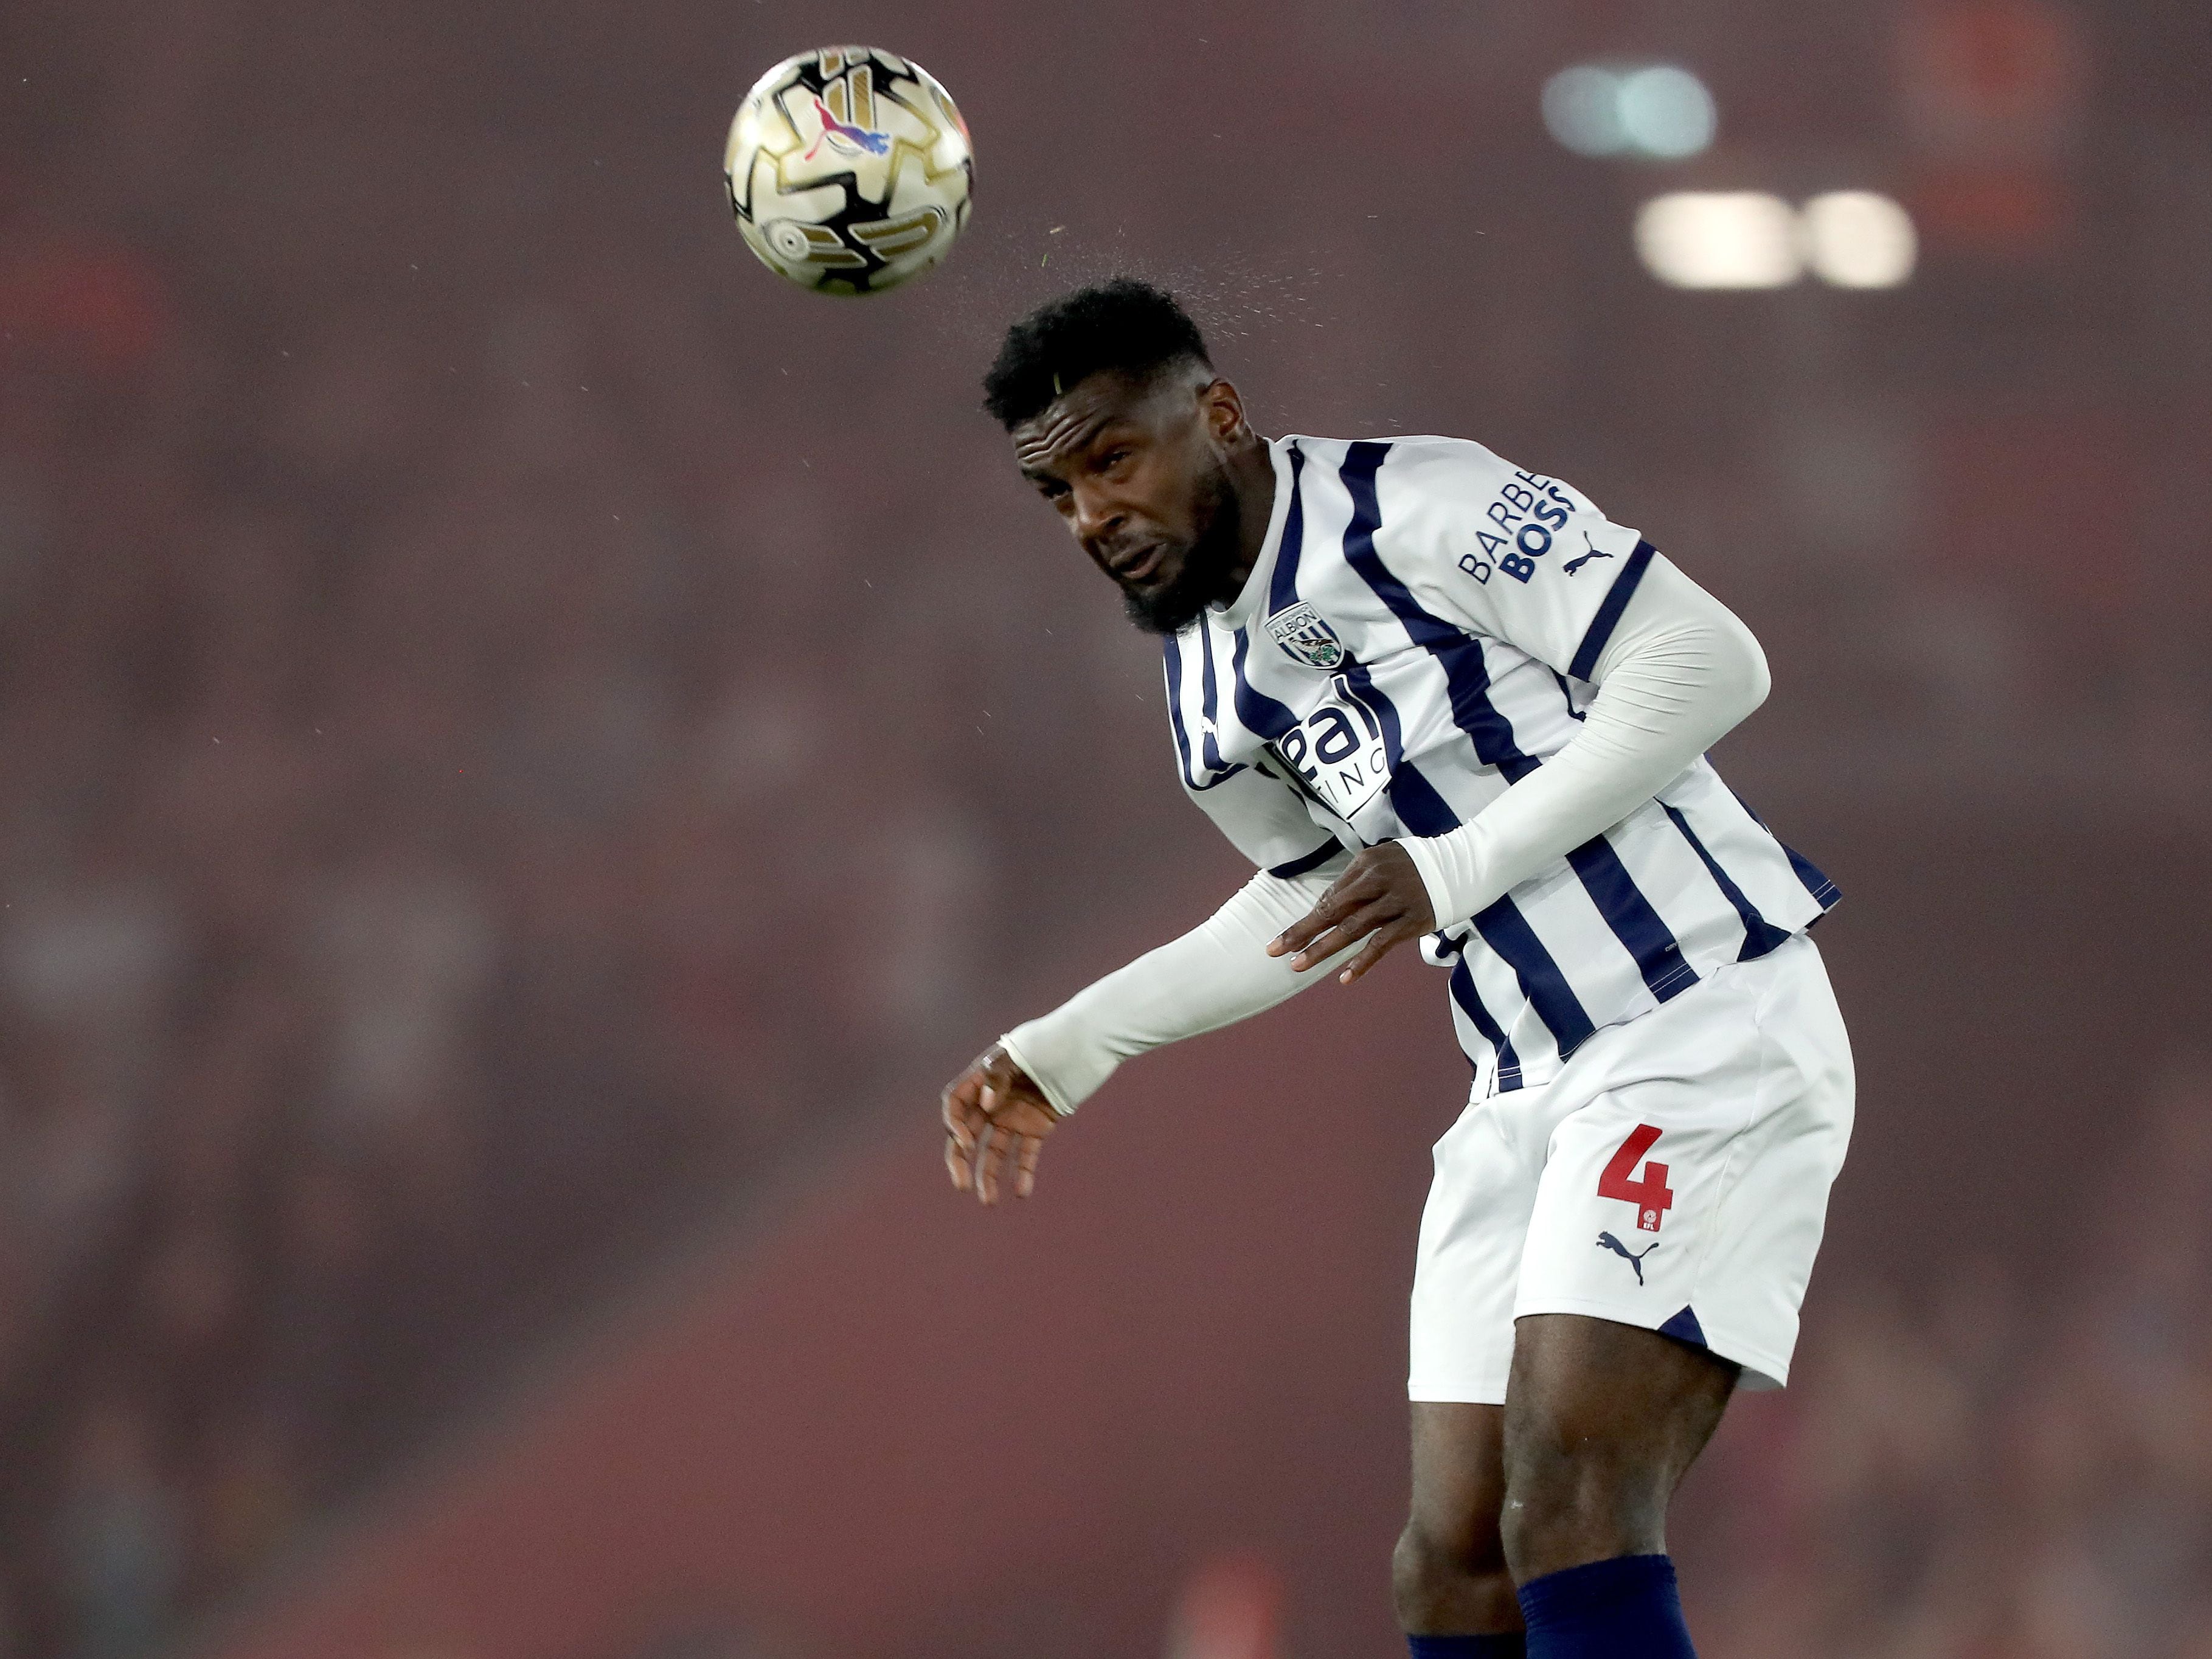 Key West Brom defender edges closer to exit as talks take place